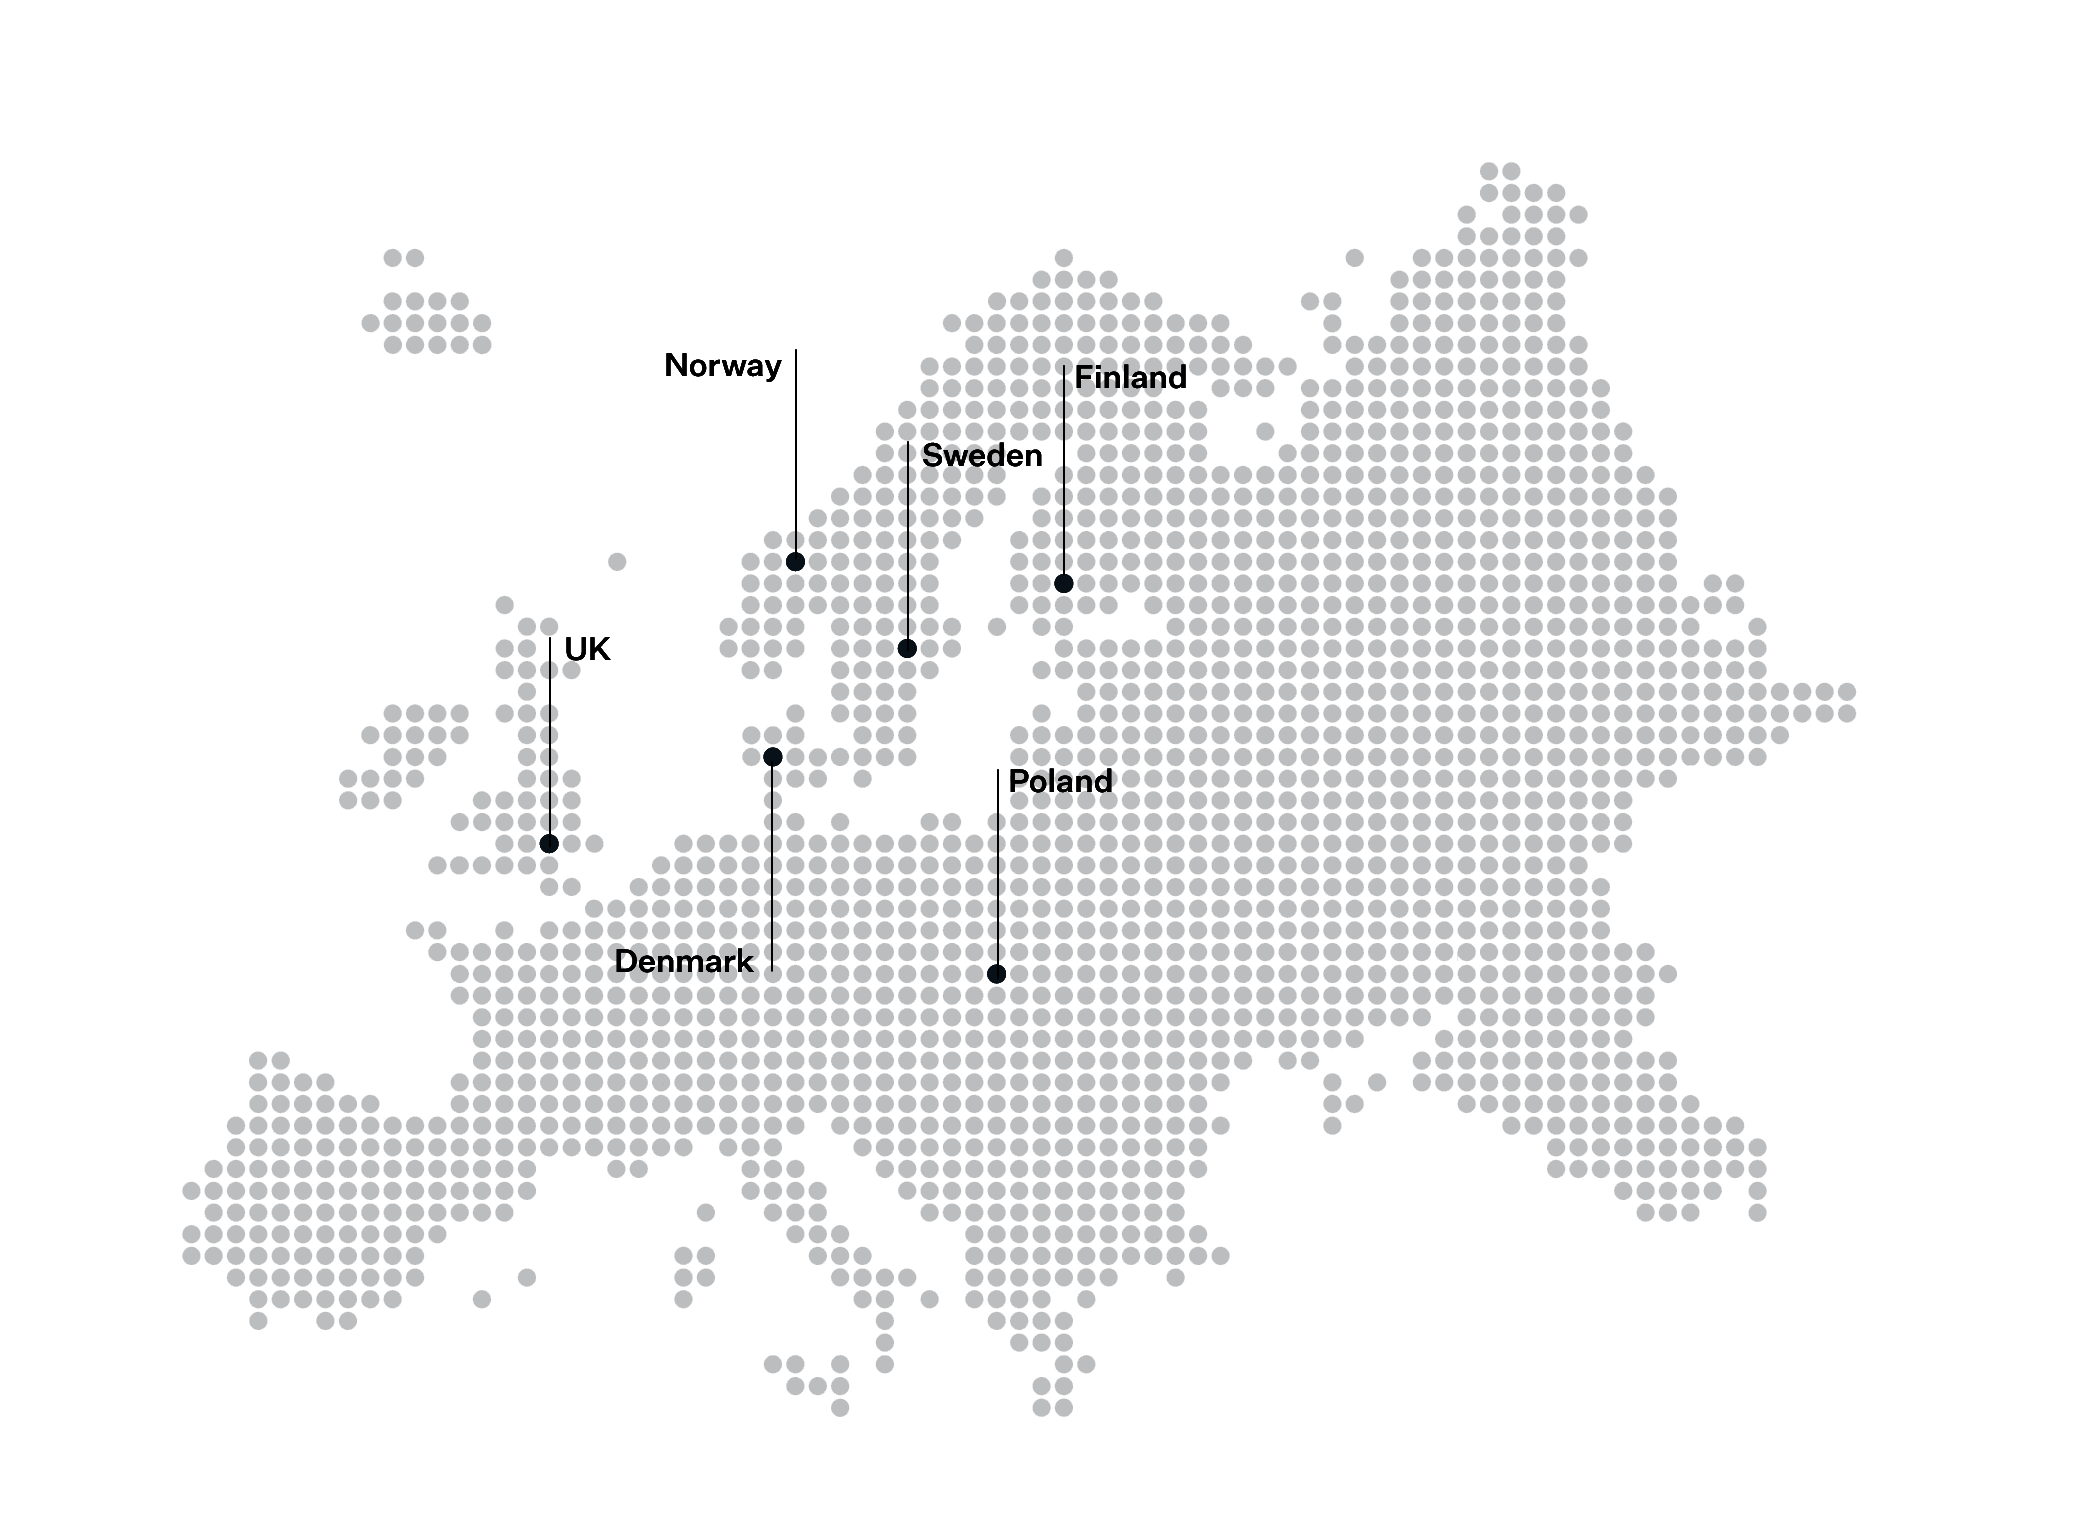 Map of Europe where Solteq's countries of operation are named